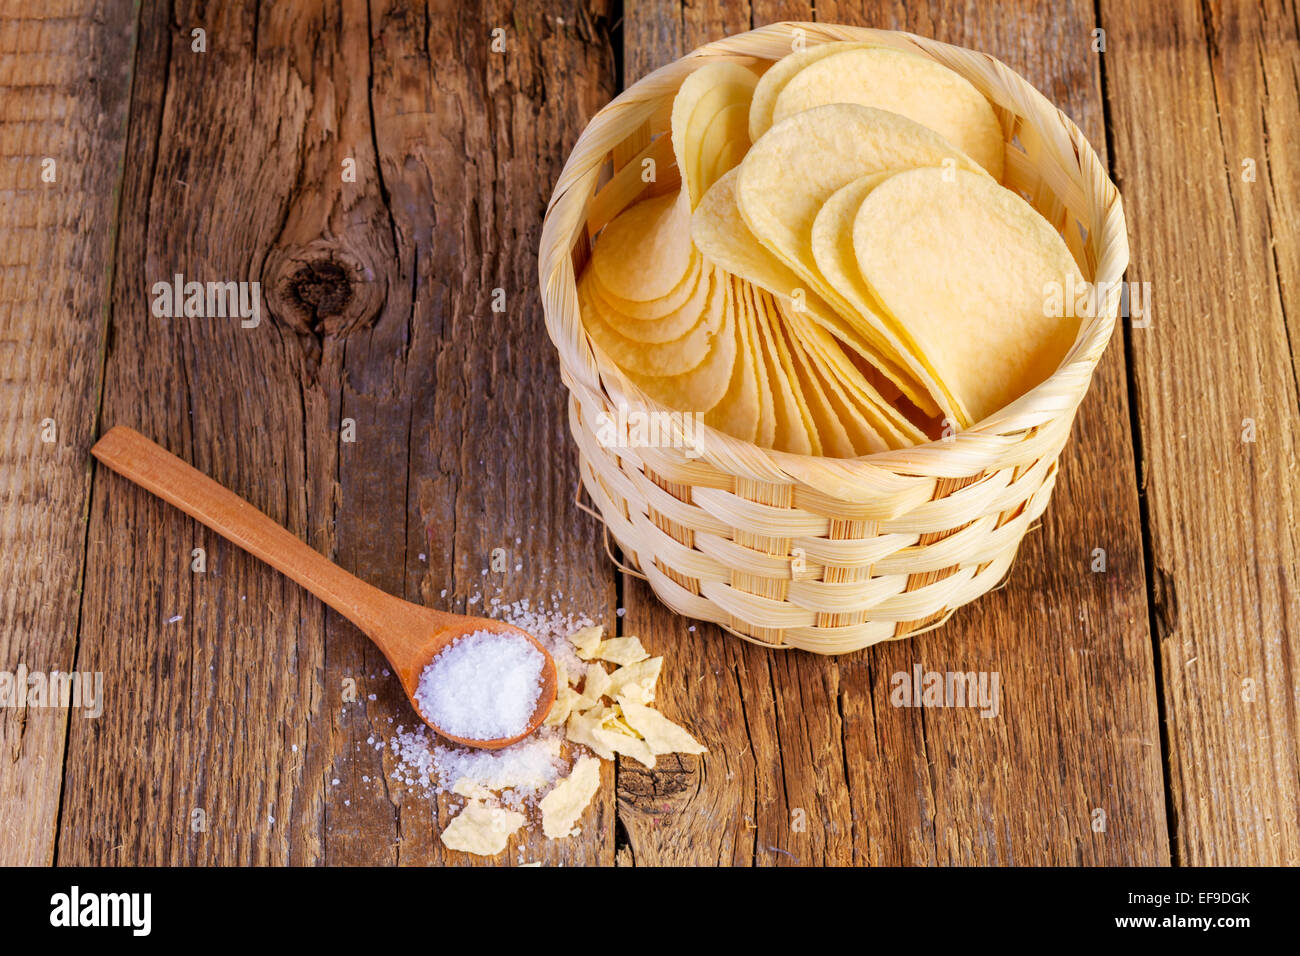 potato chips in a wooden basket and spoon on wooden table Stock Photo